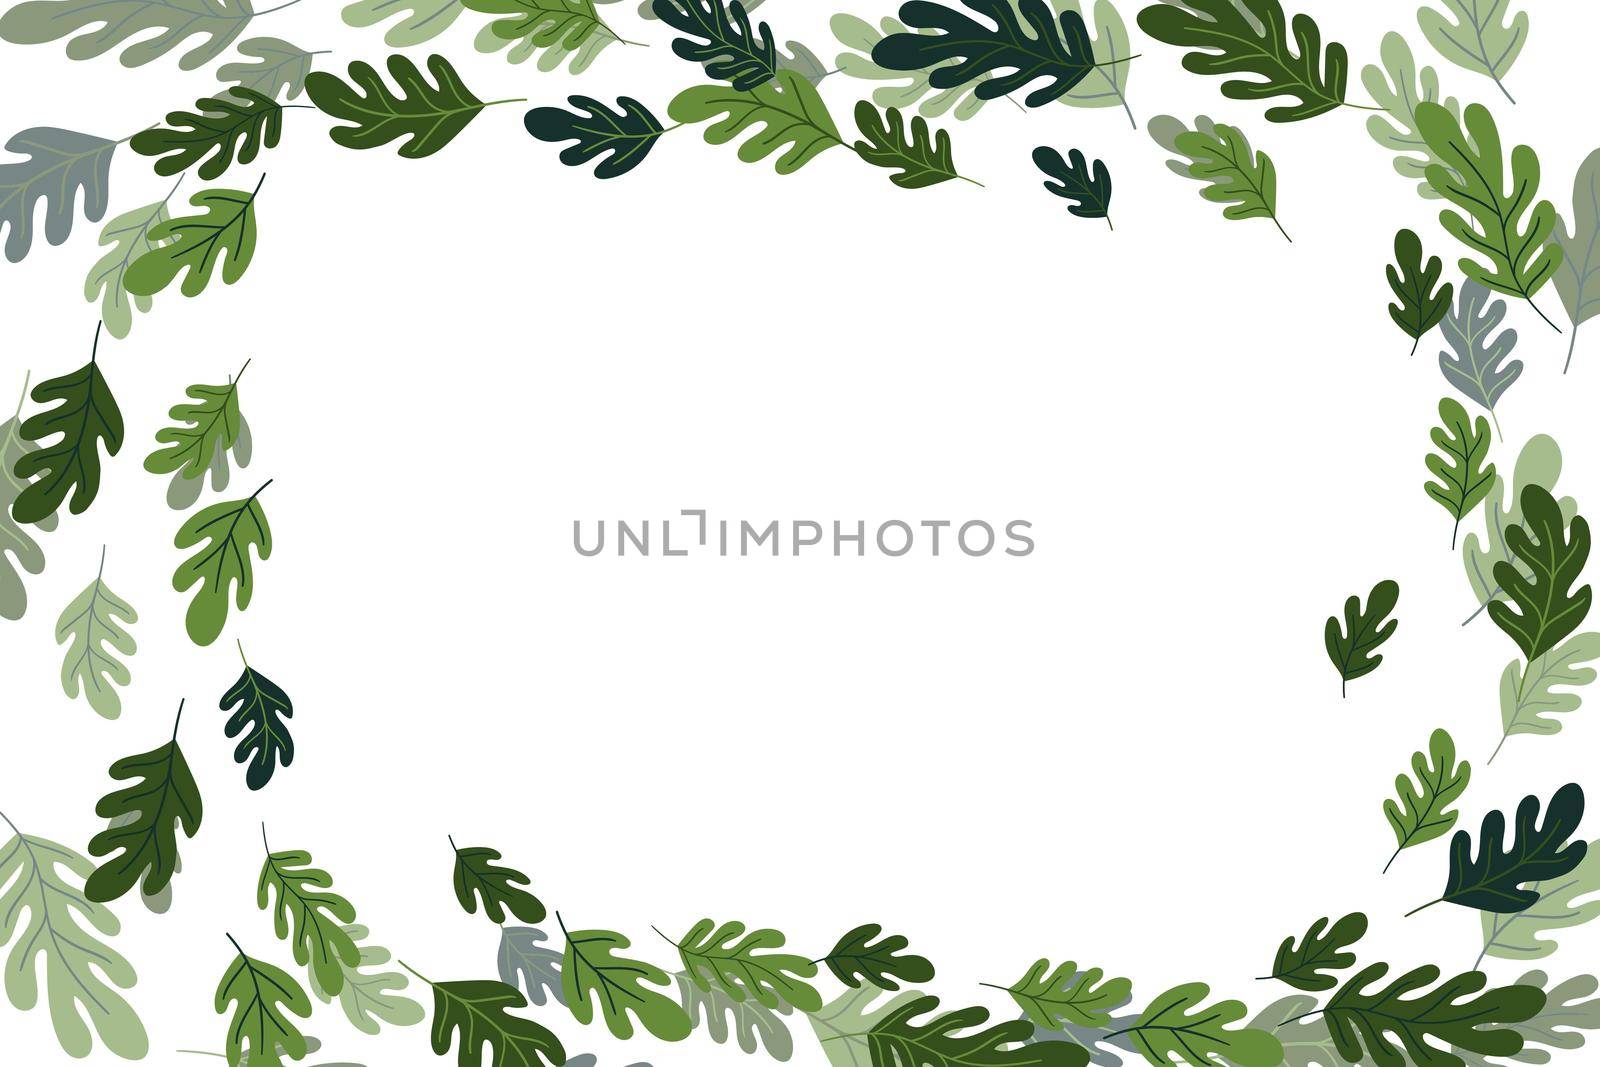 Floral frame with colorful exotic branches on white background. Ornate border with tropic leaves. Vector stock illustration for wallpaper, posters, card. Doodle style. Copy space